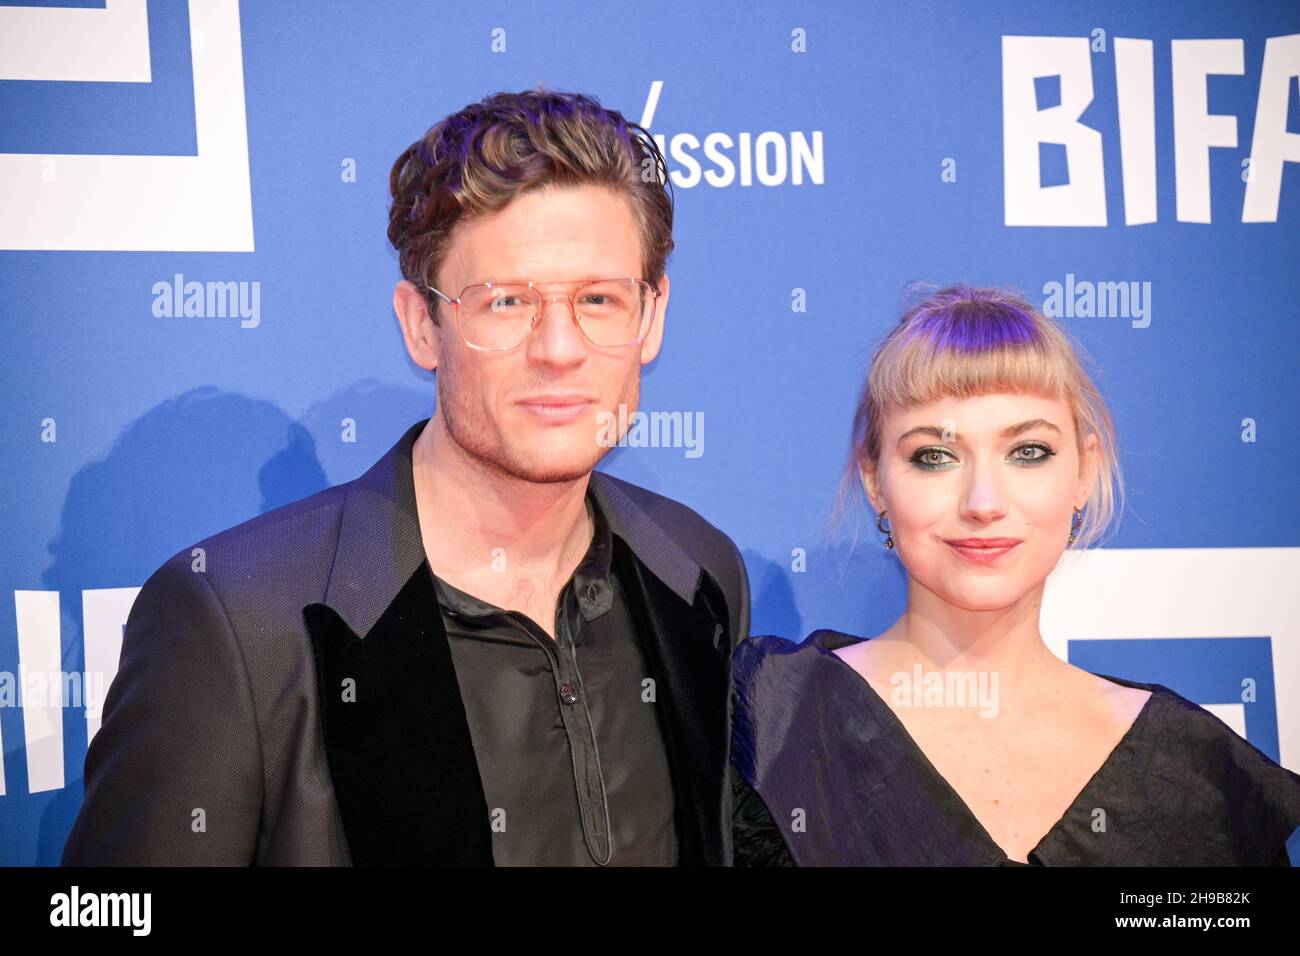 London, UK. 5th December 2012: James Norton, Imogen Poots attended 24th British Independent Film Awards · BIFA at Old Billingsgate on 5th December 2012, London, UK. Credit: Picture Capital/Alamy Live News Stock Photo